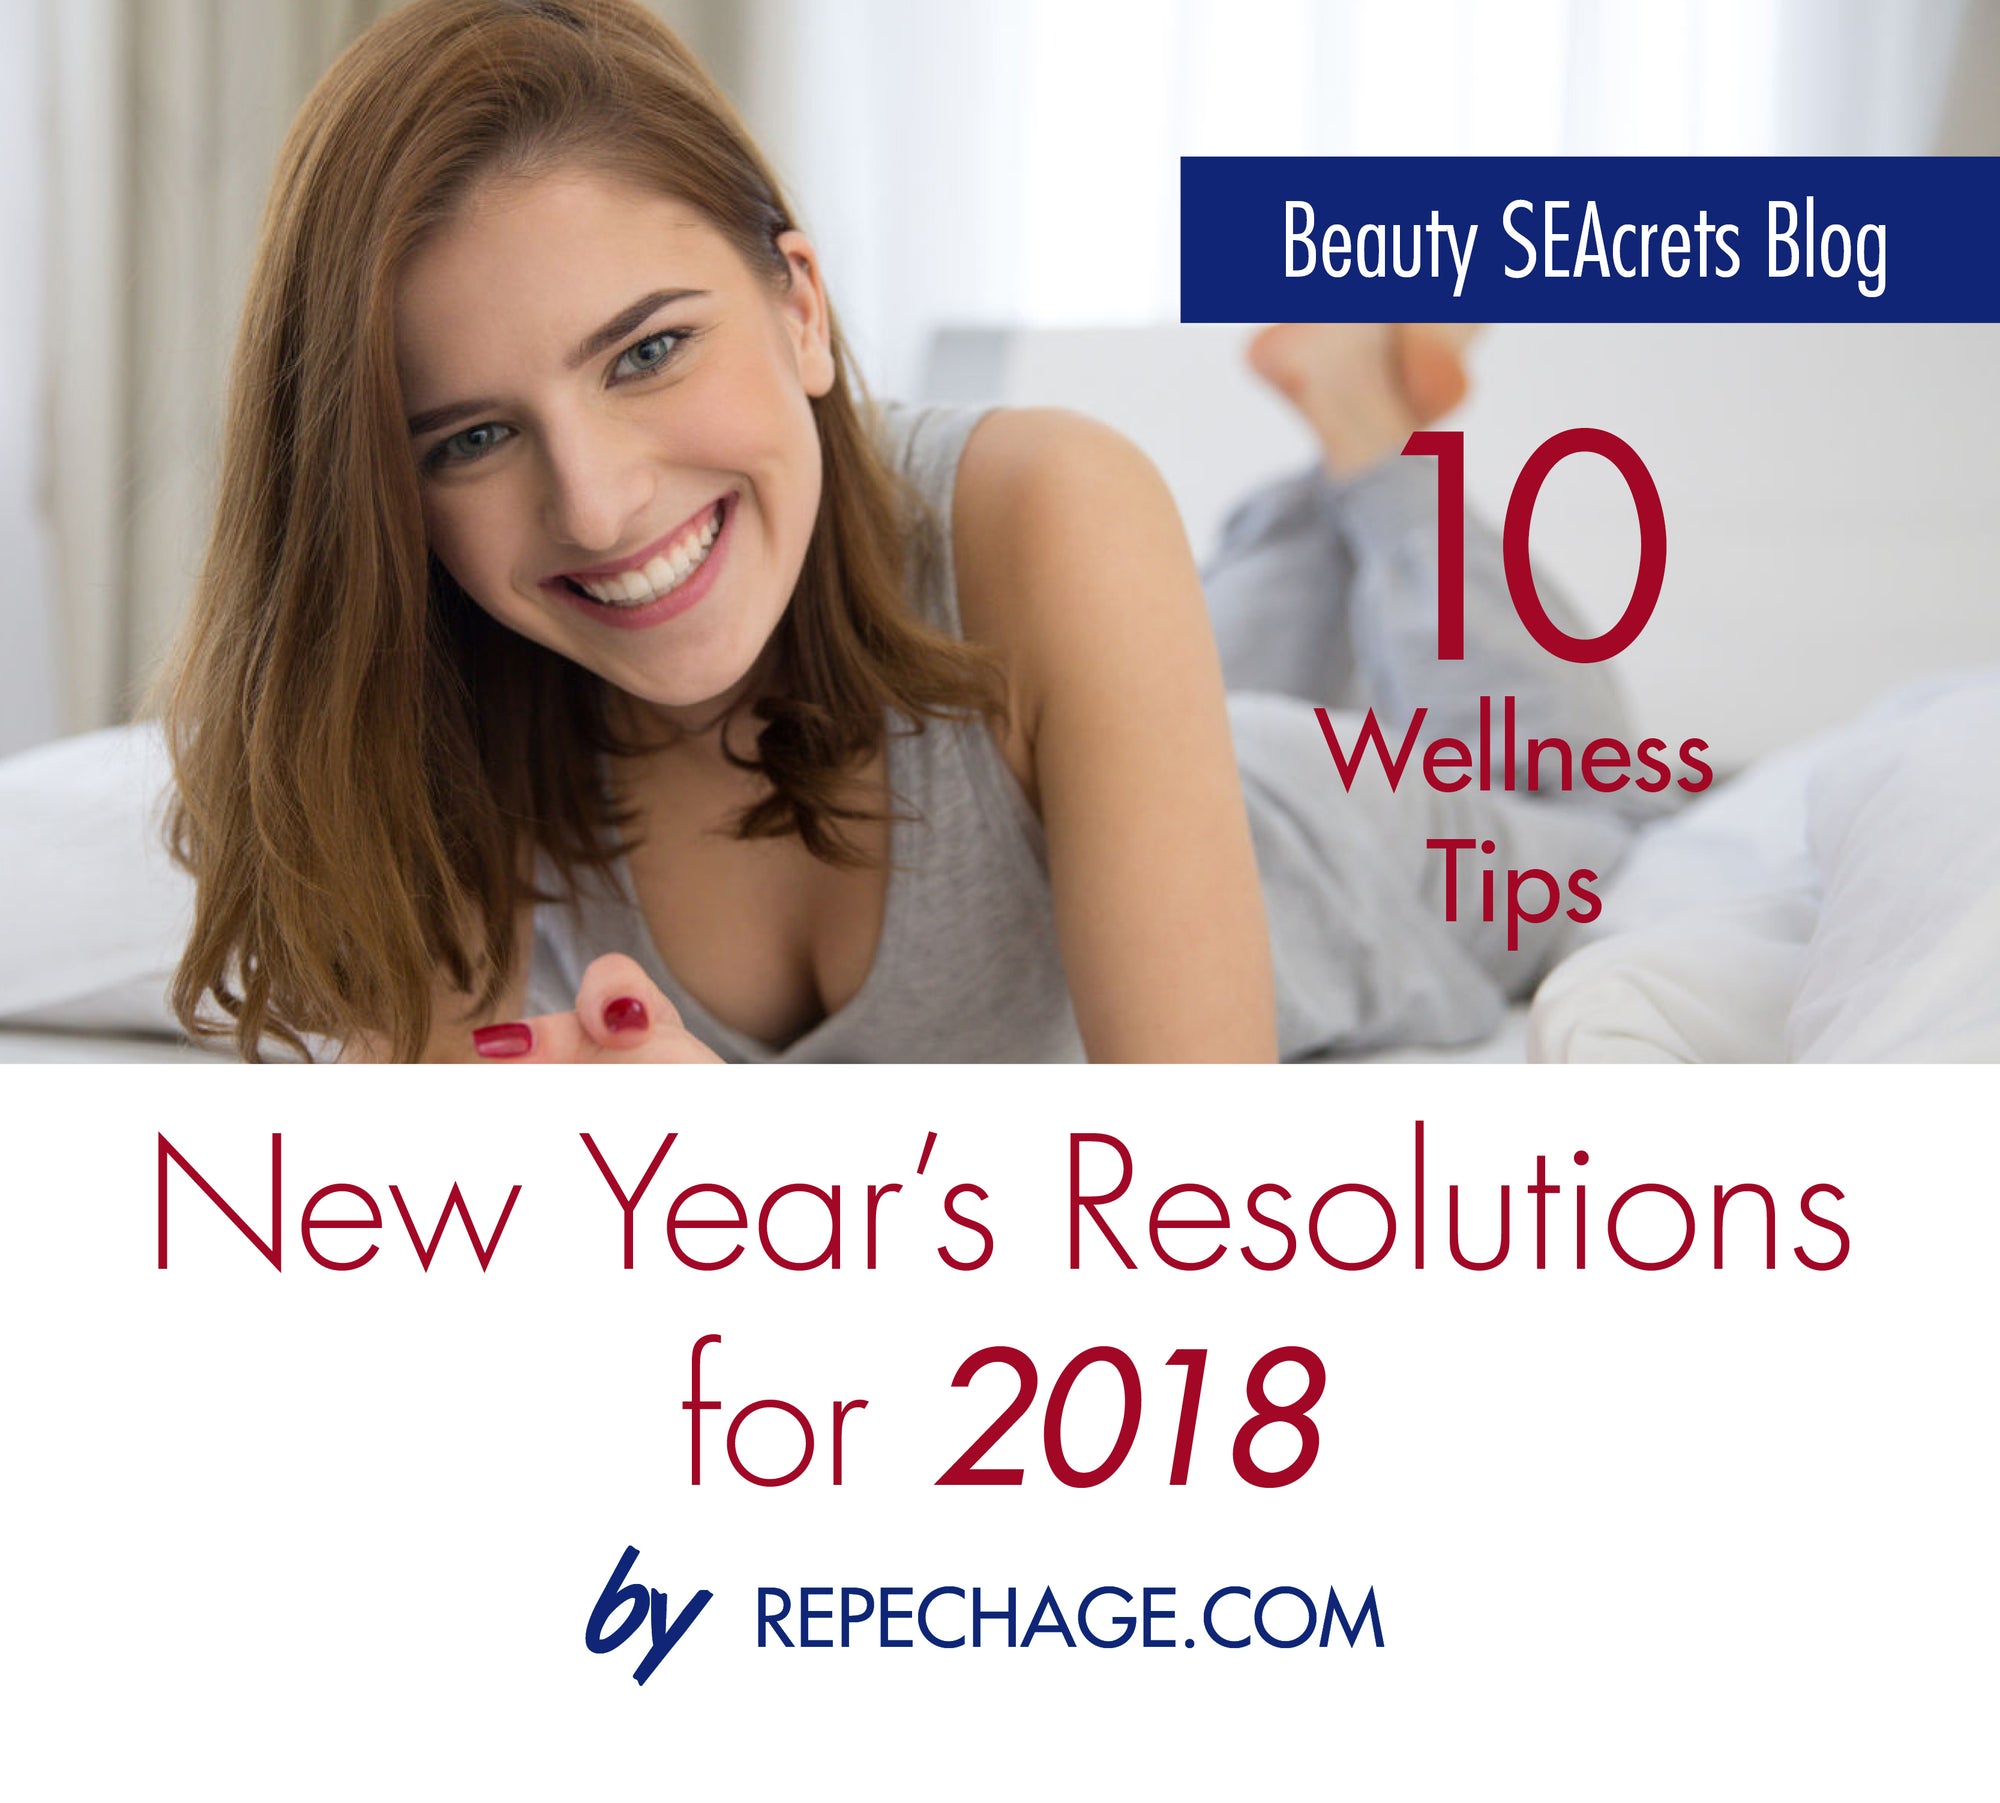 10 Wellness Tips / New Year’s Resolutions for 2018